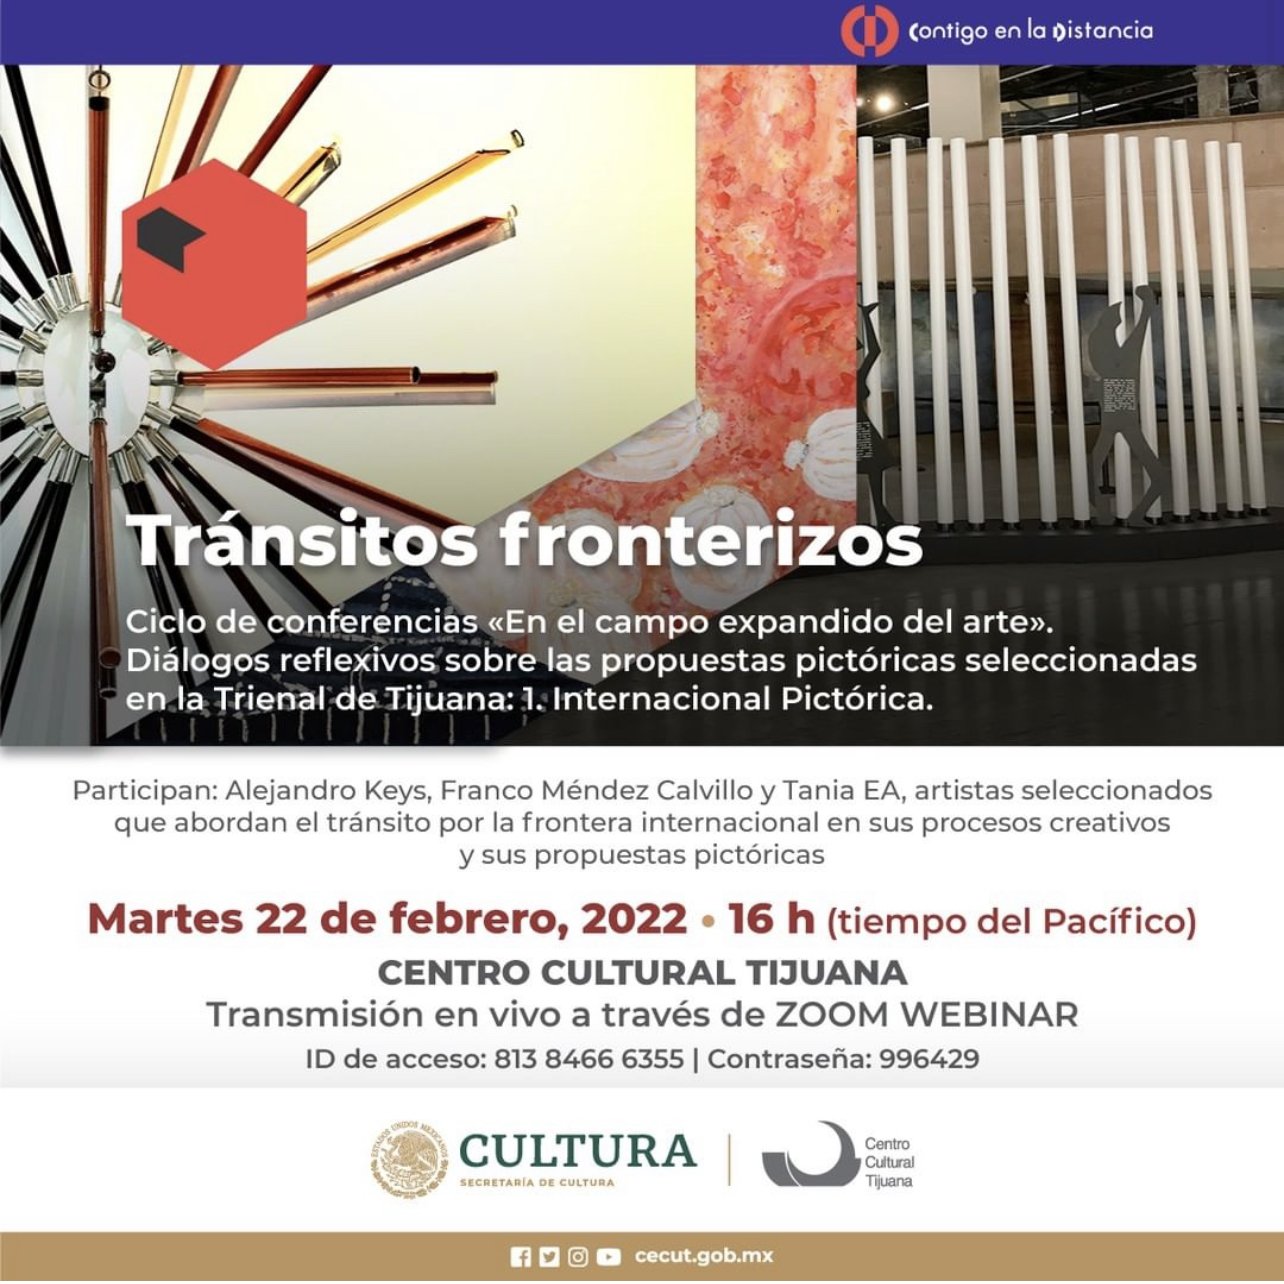 Conference about my sculpture in the Tijuana Triennale (Copy)